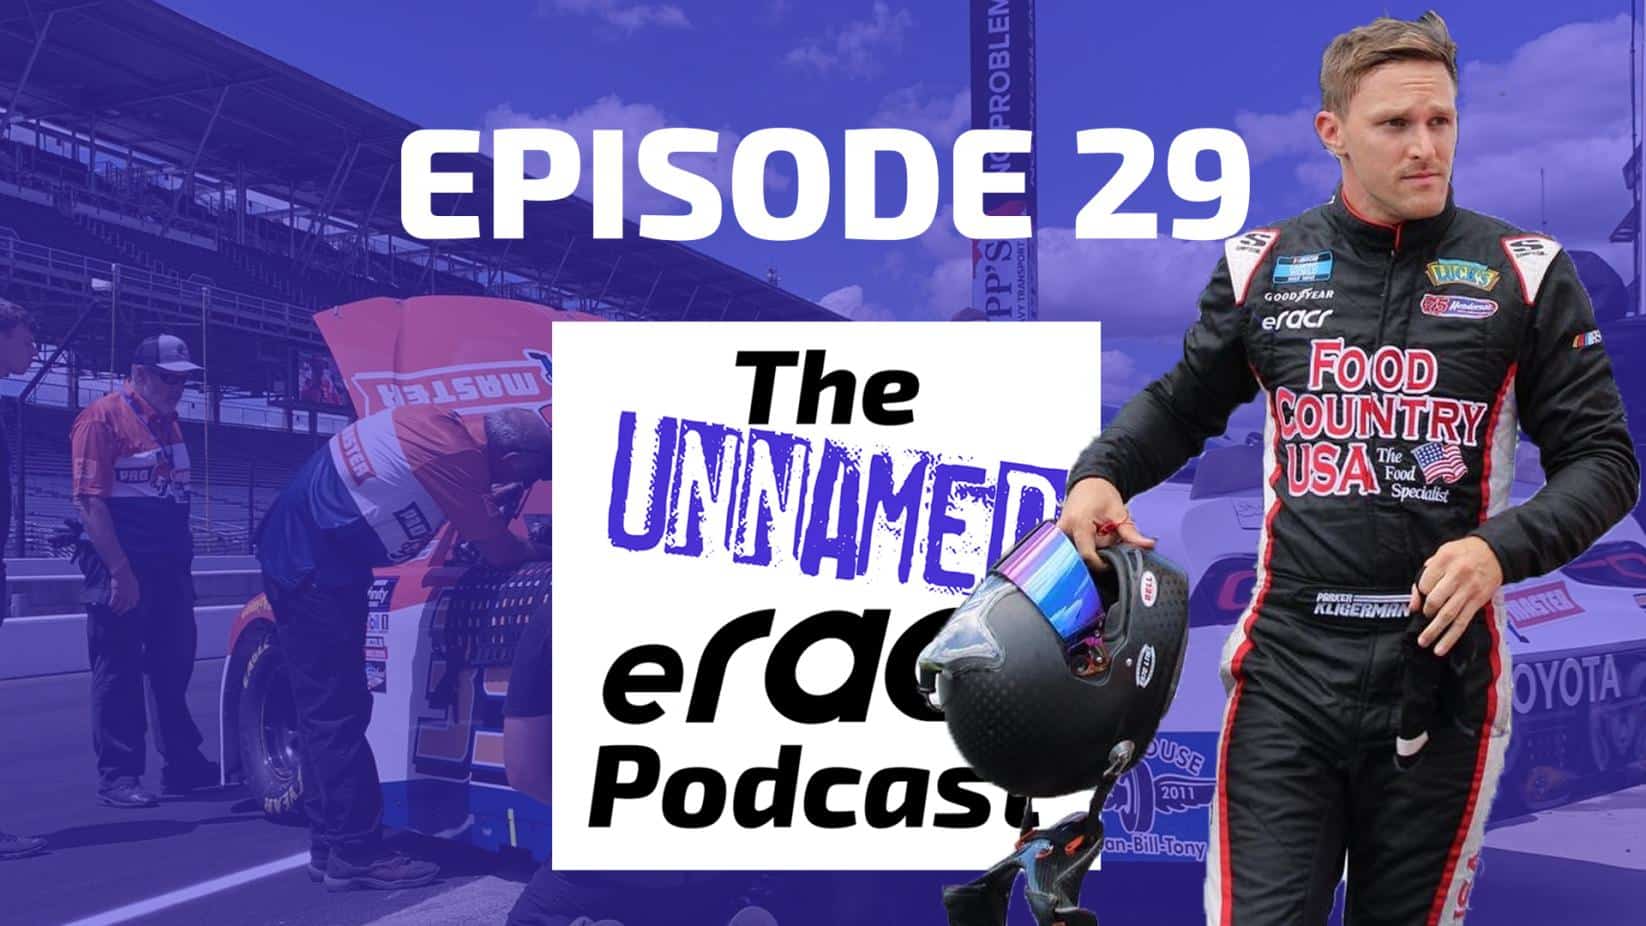 The Unnamed eRacr Podcast – Episode 29 – Listen or Watch NOW 🎧📺